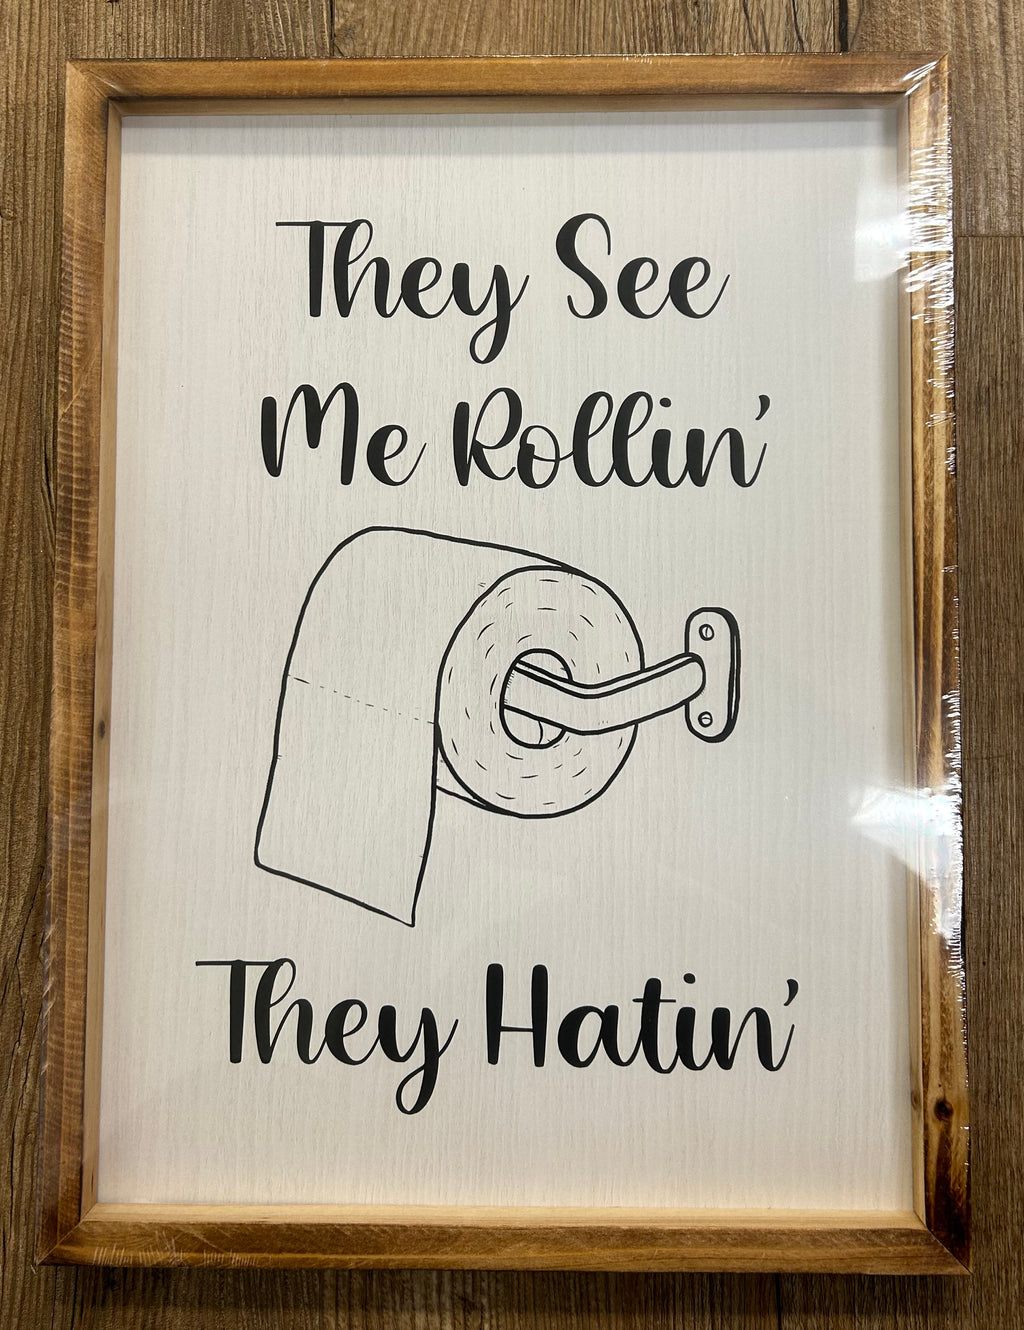 They See Me Rollin’ Bathroom Wall Hanging - Lighten Up Shop